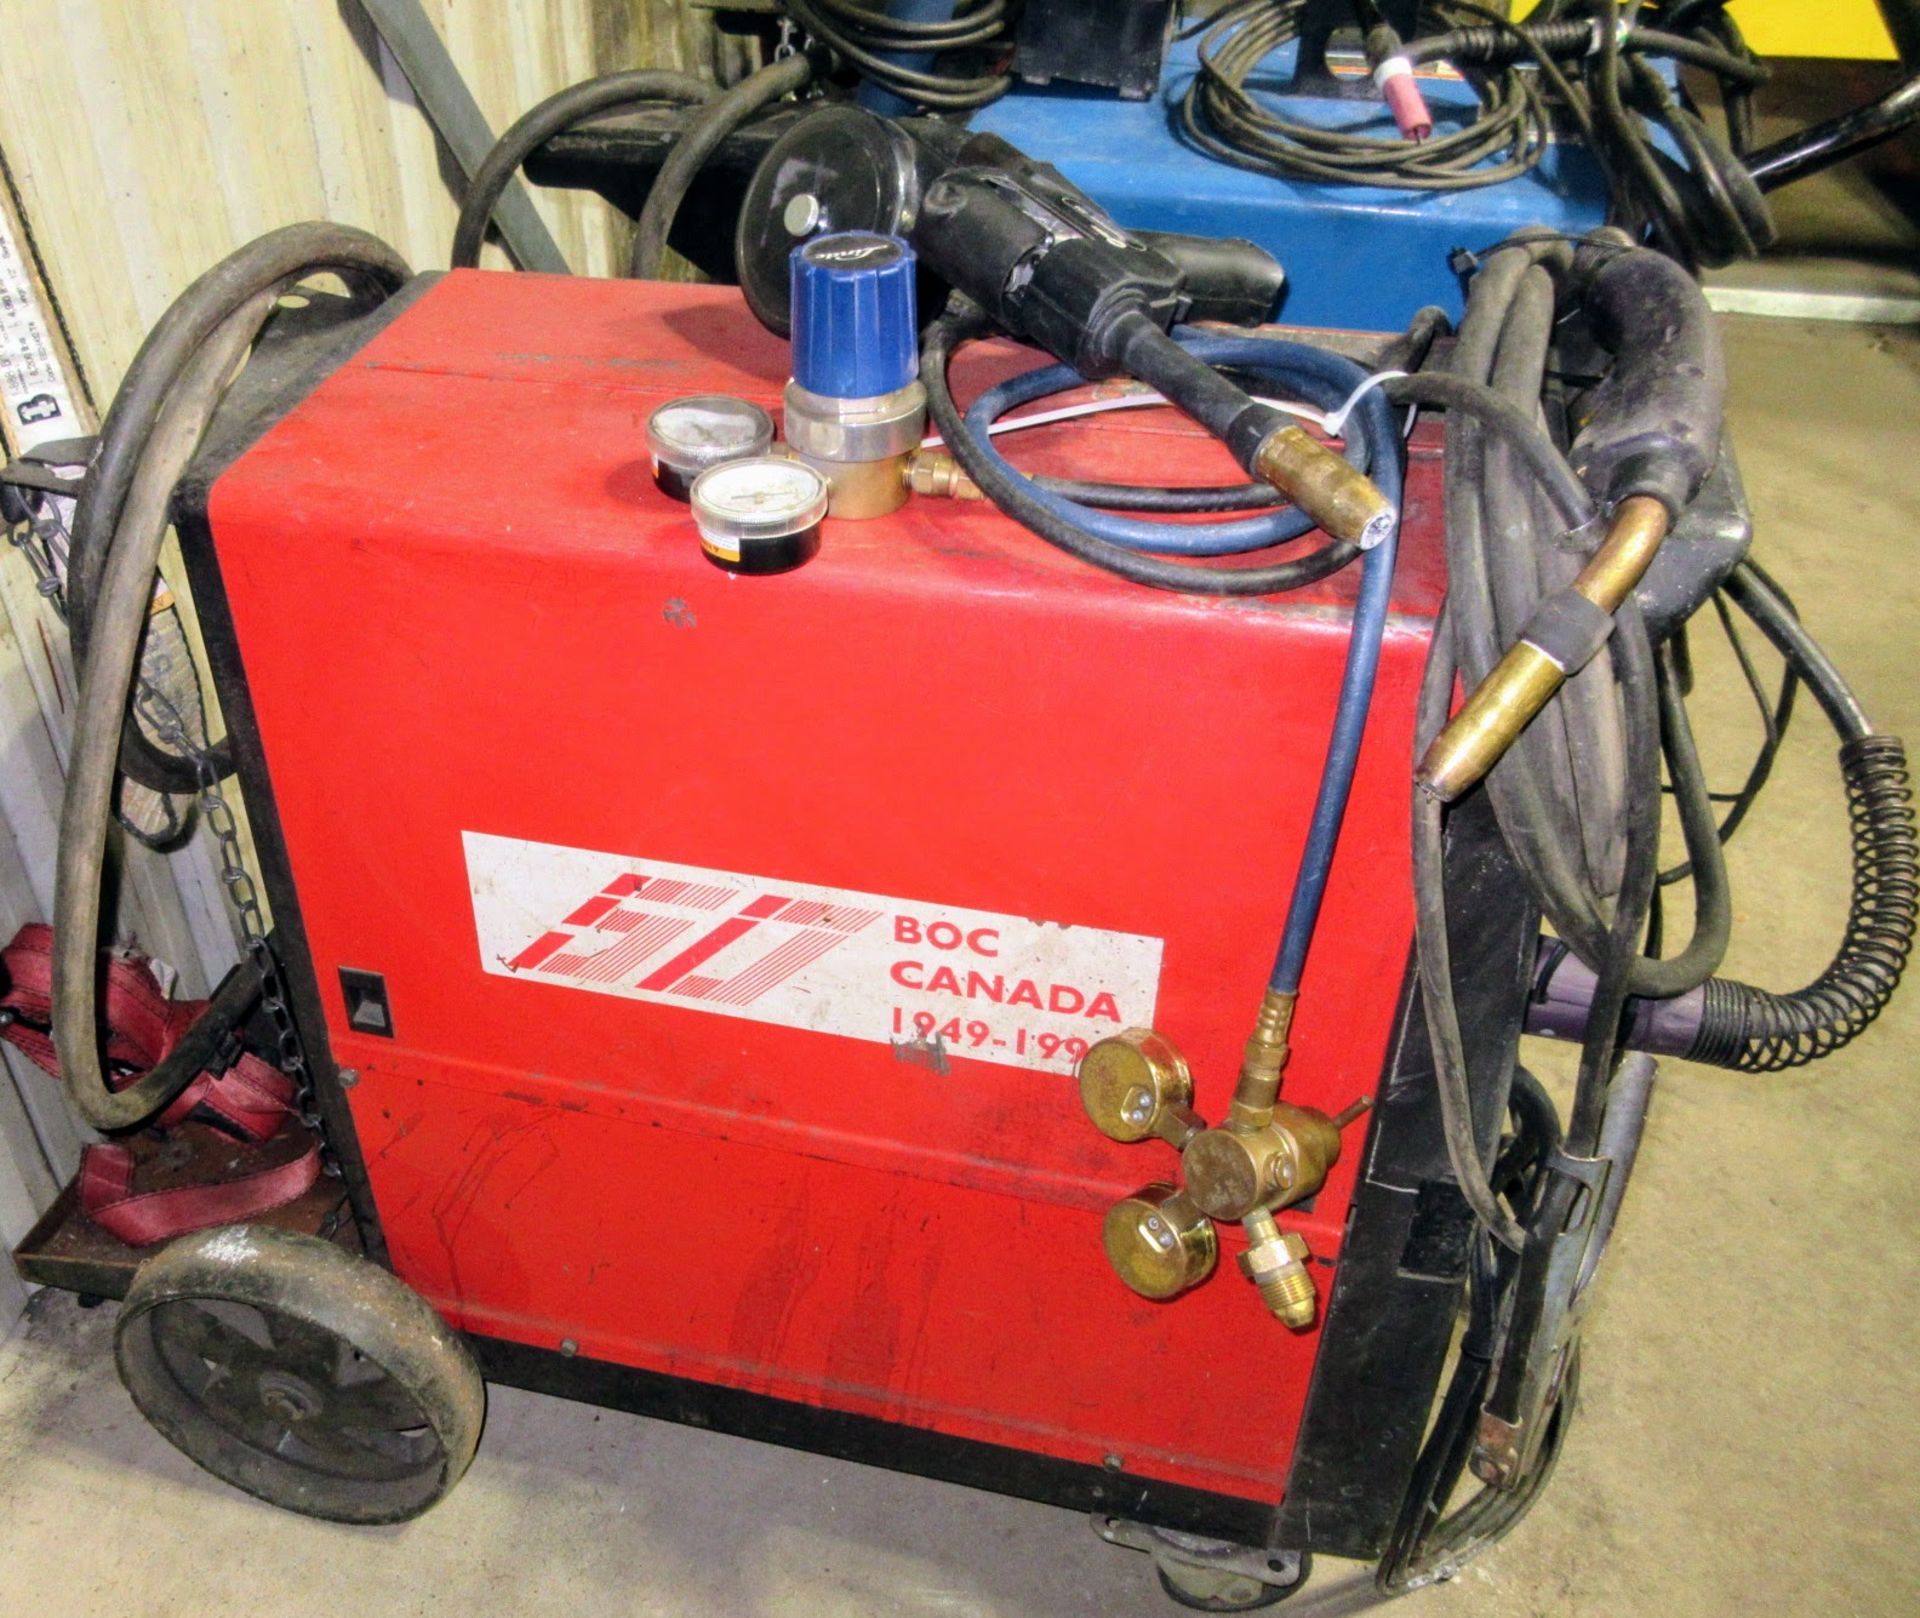 BOC MIGMATIC 250X WELDER W/ MILLER SPOOLMATIC 30A AIR COOLED SPOOL GUN, MIG TORCH, CABLES AND CART - Image 2 of 5